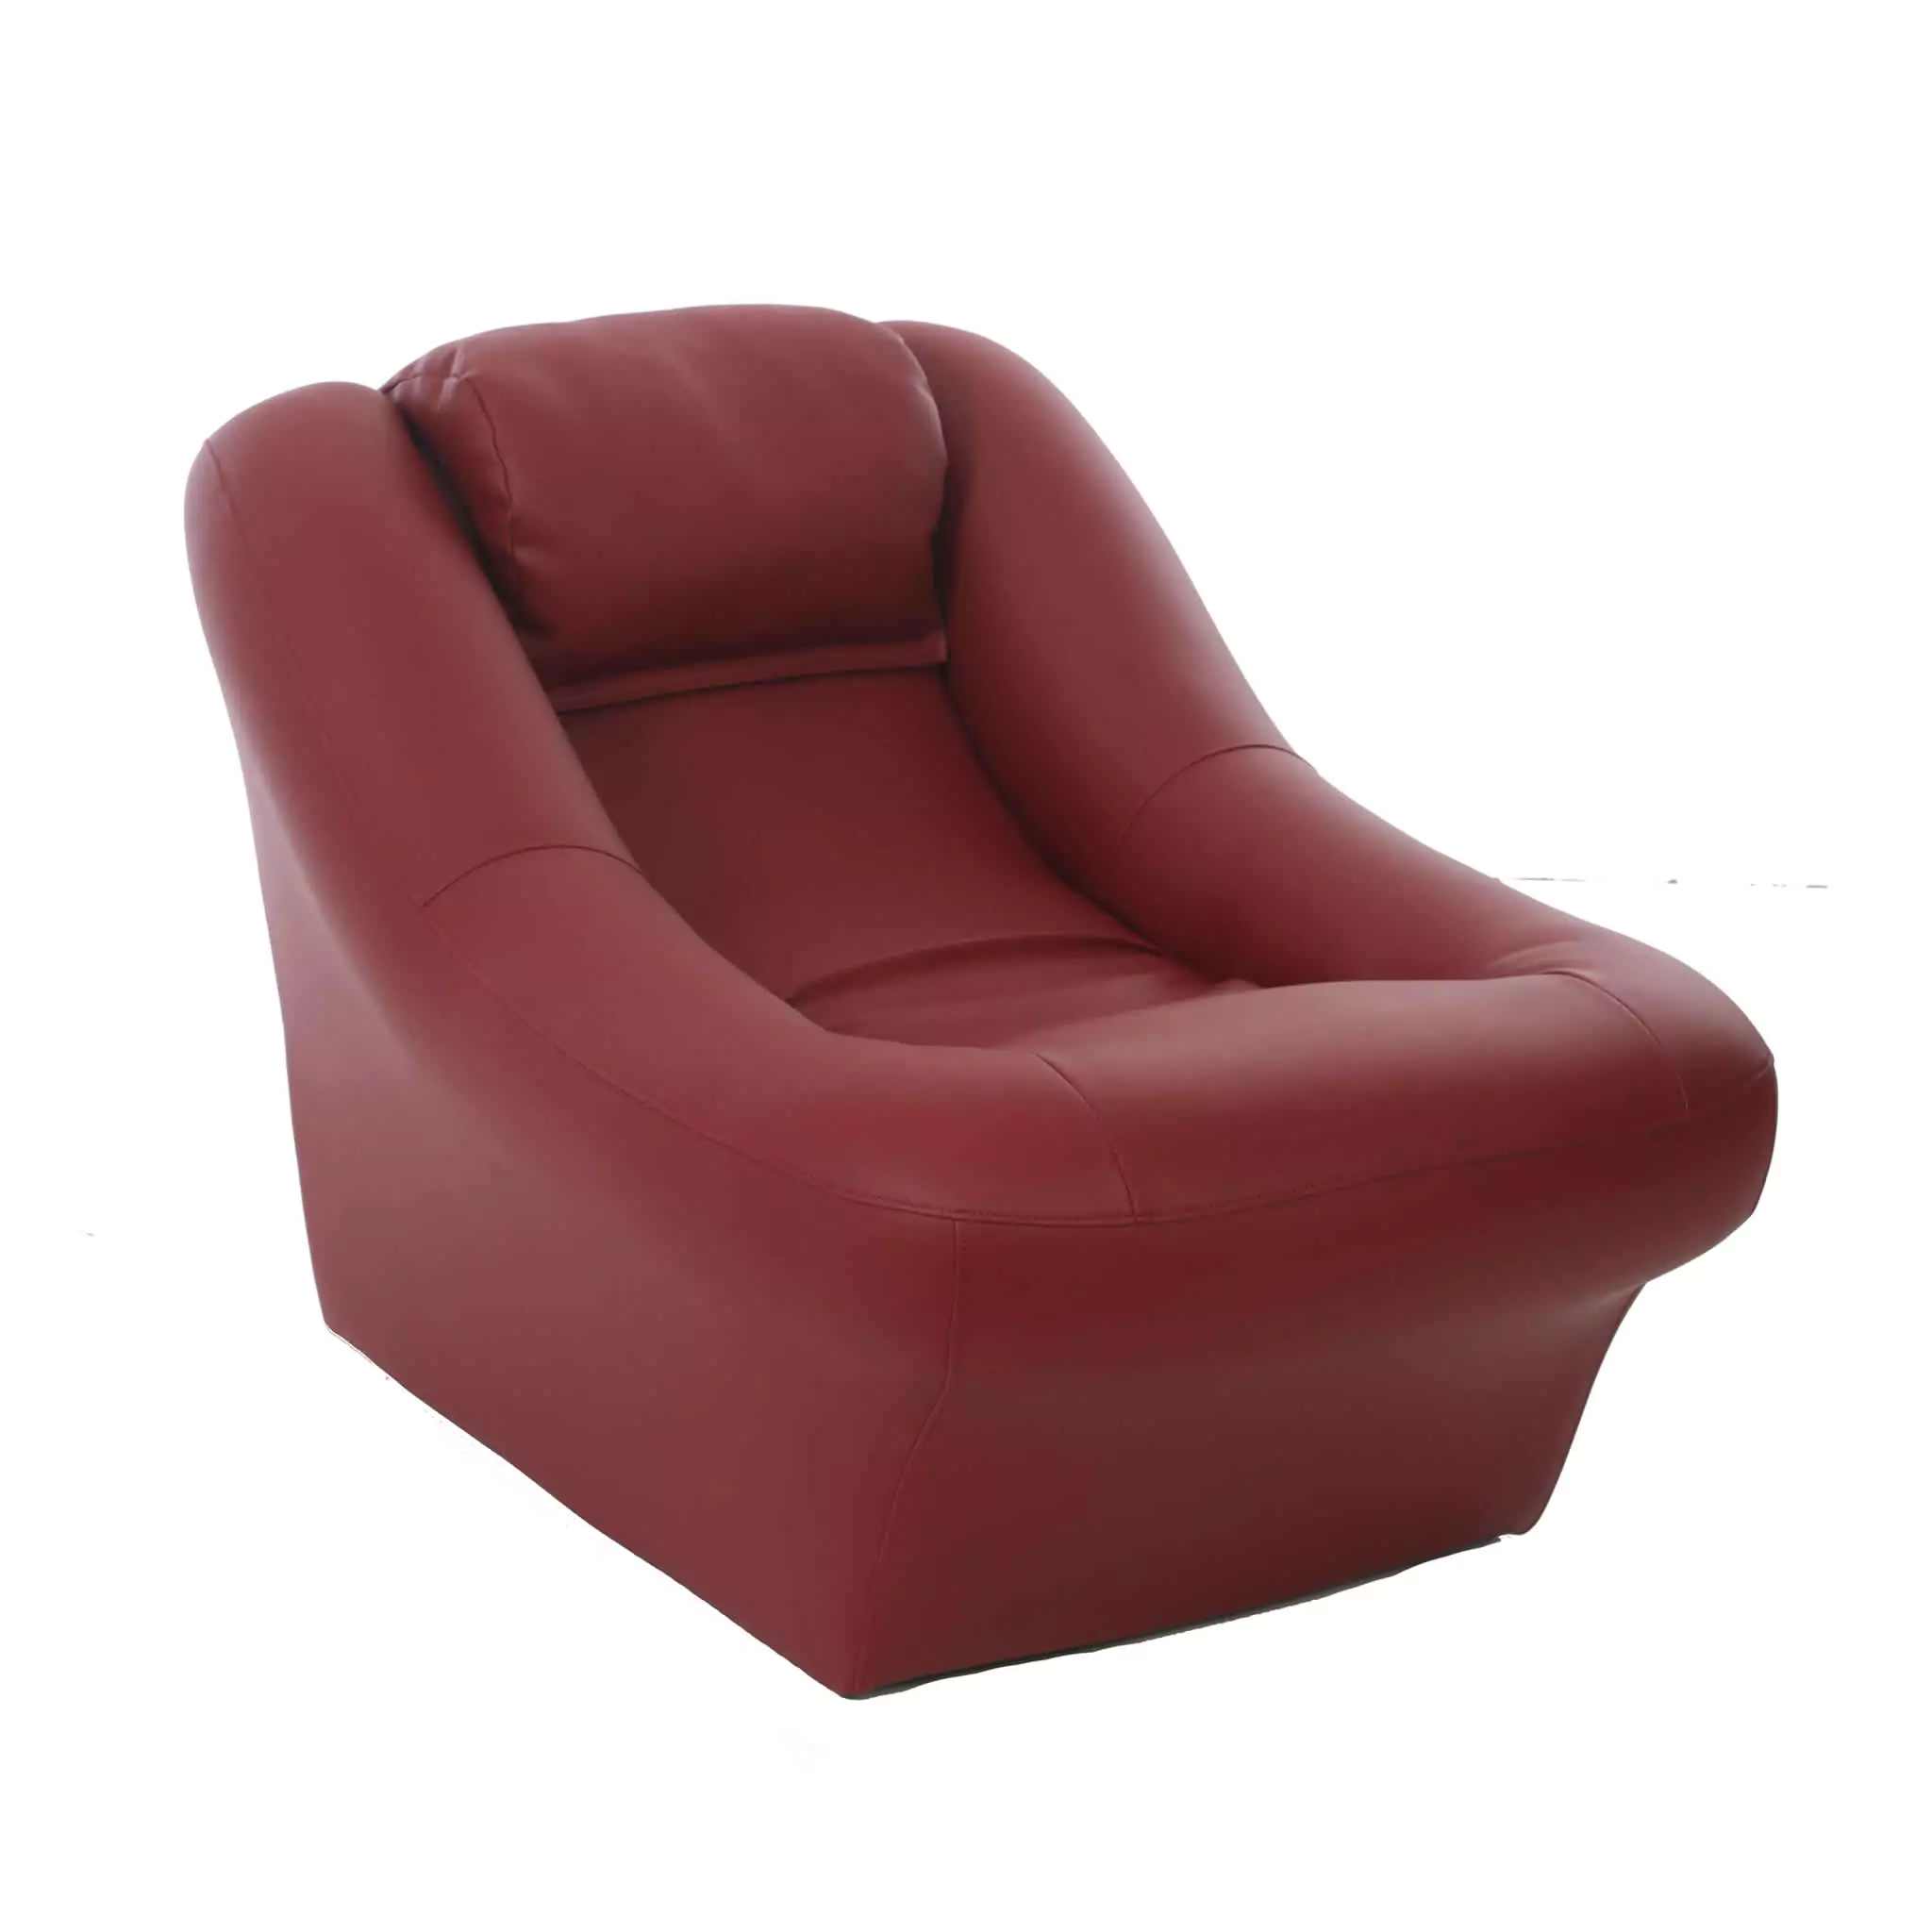 Simko Seating Product Foyer Seat Model 1